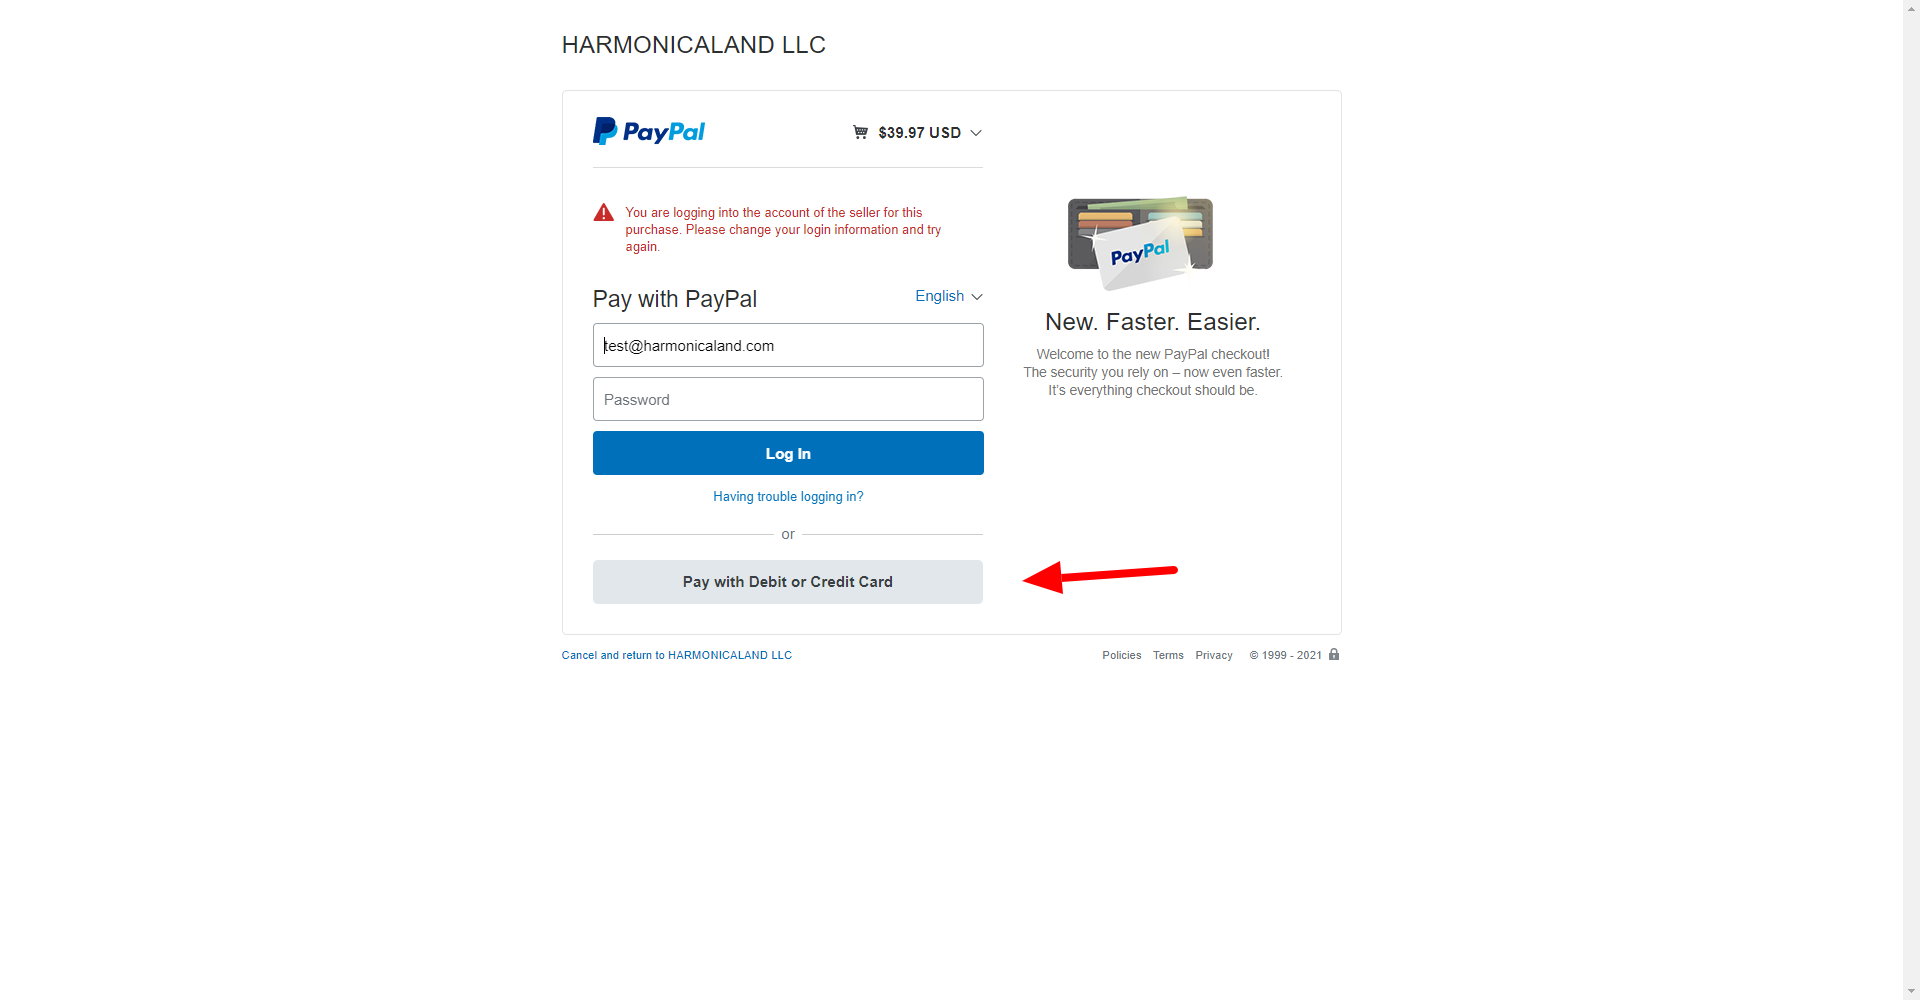 Use Paypal to order harmonicas or pay by credit card